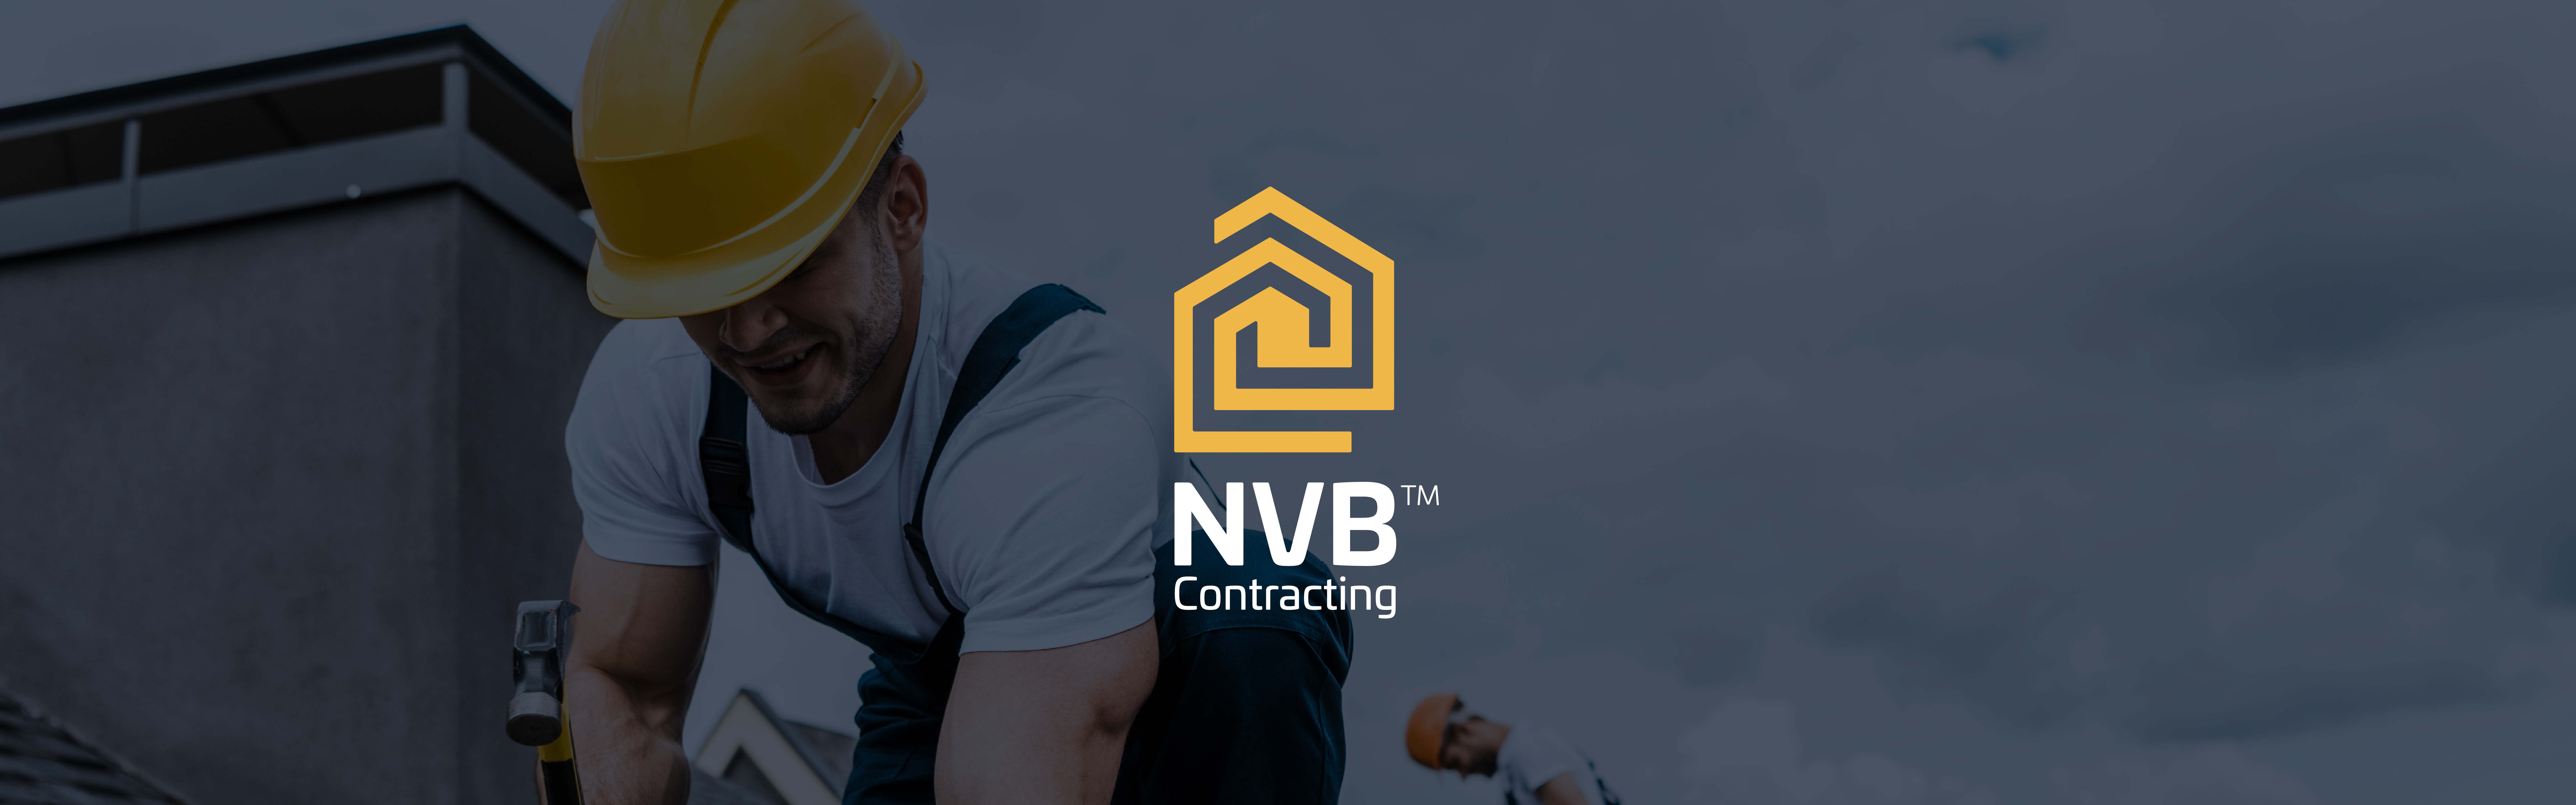 NVB Contracting logo design